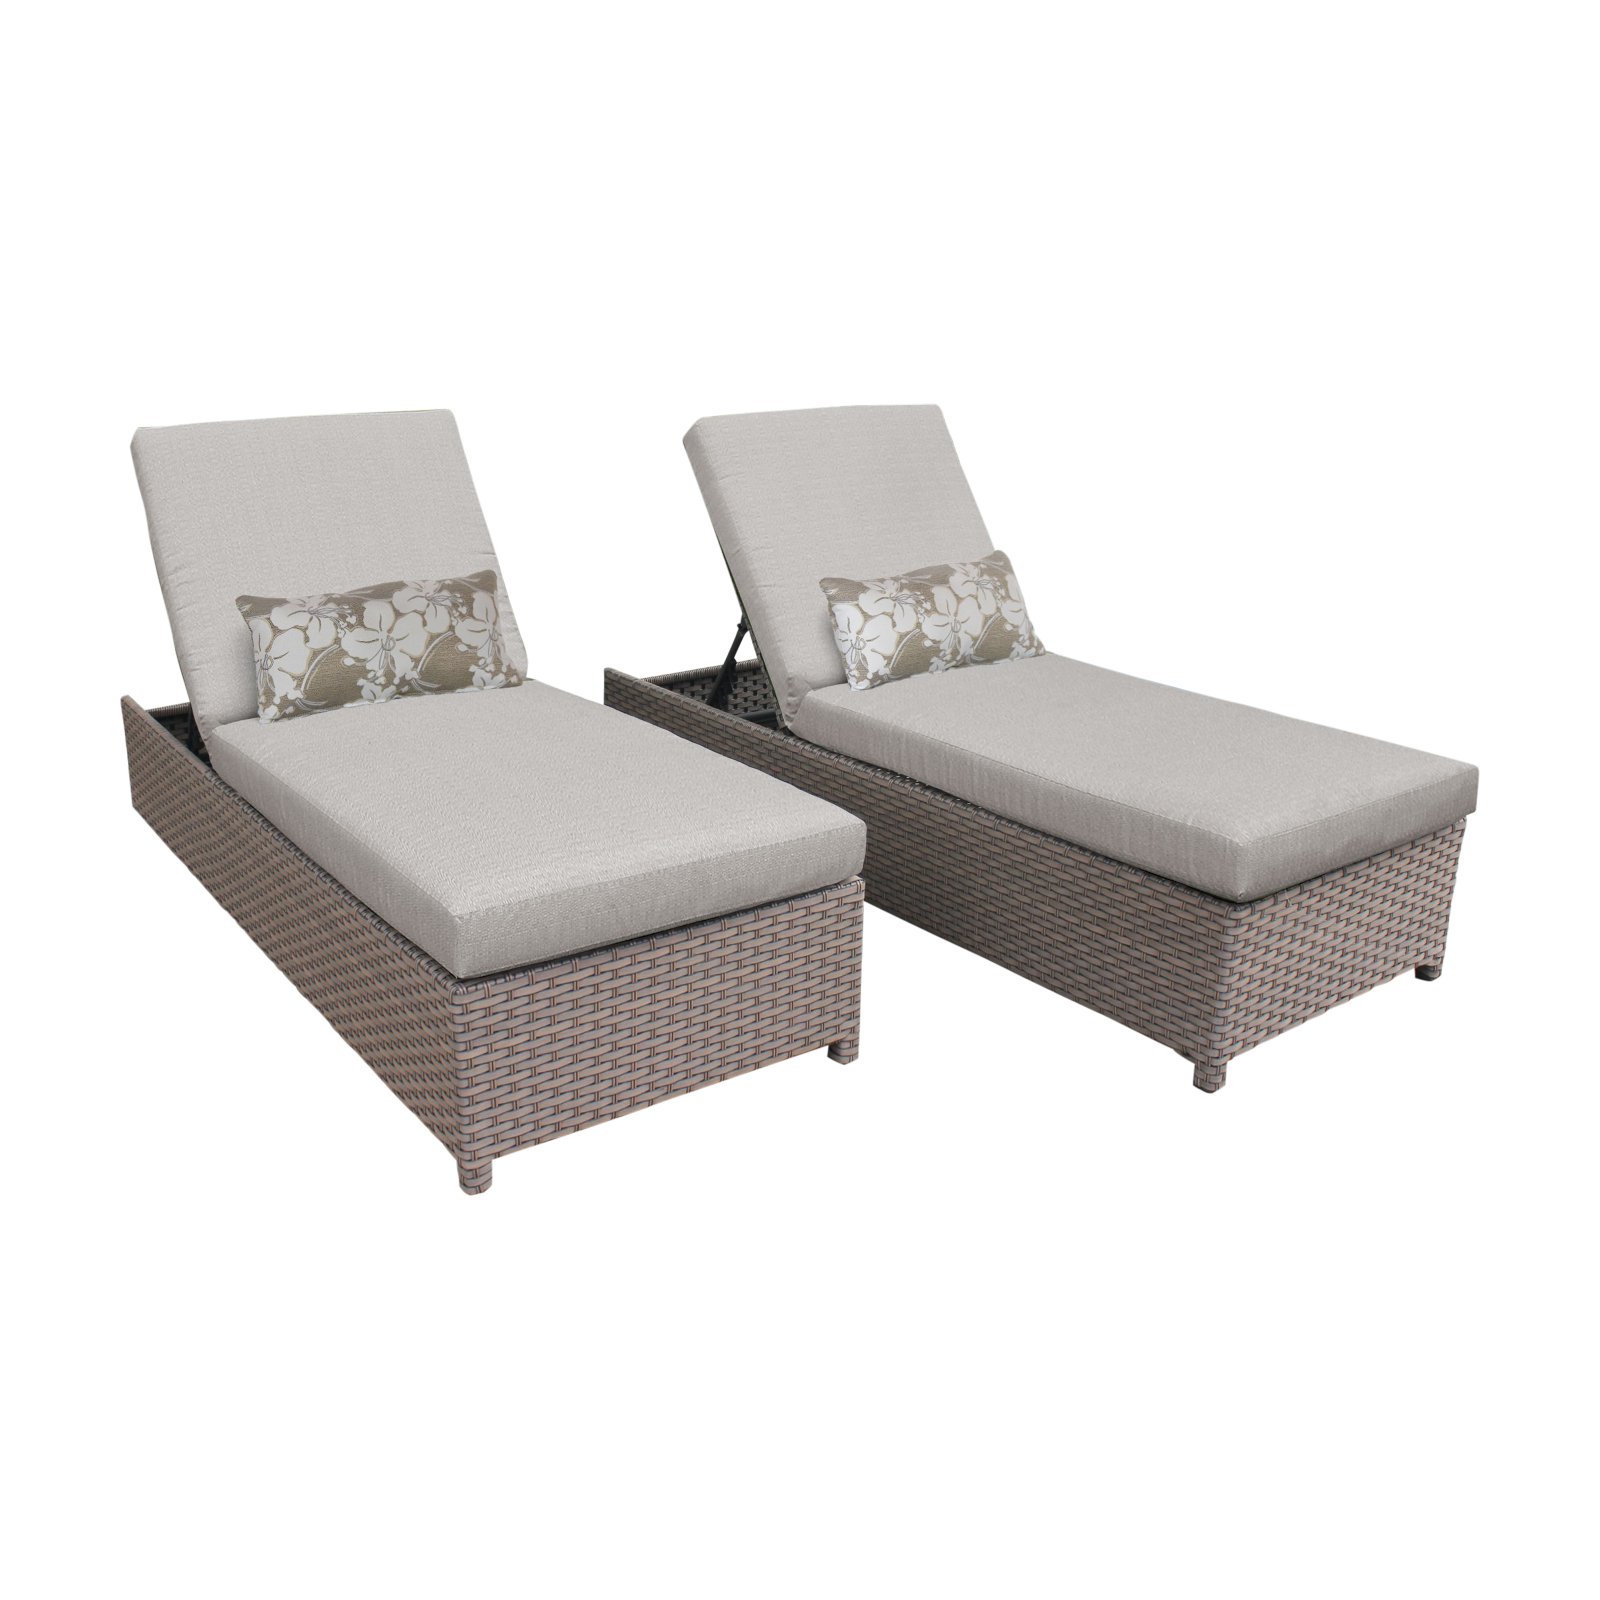 TK Classics Florence Wheeled Wicker Outdoor Chaise Lounge Chair - Set of 2 - image 1 of 11